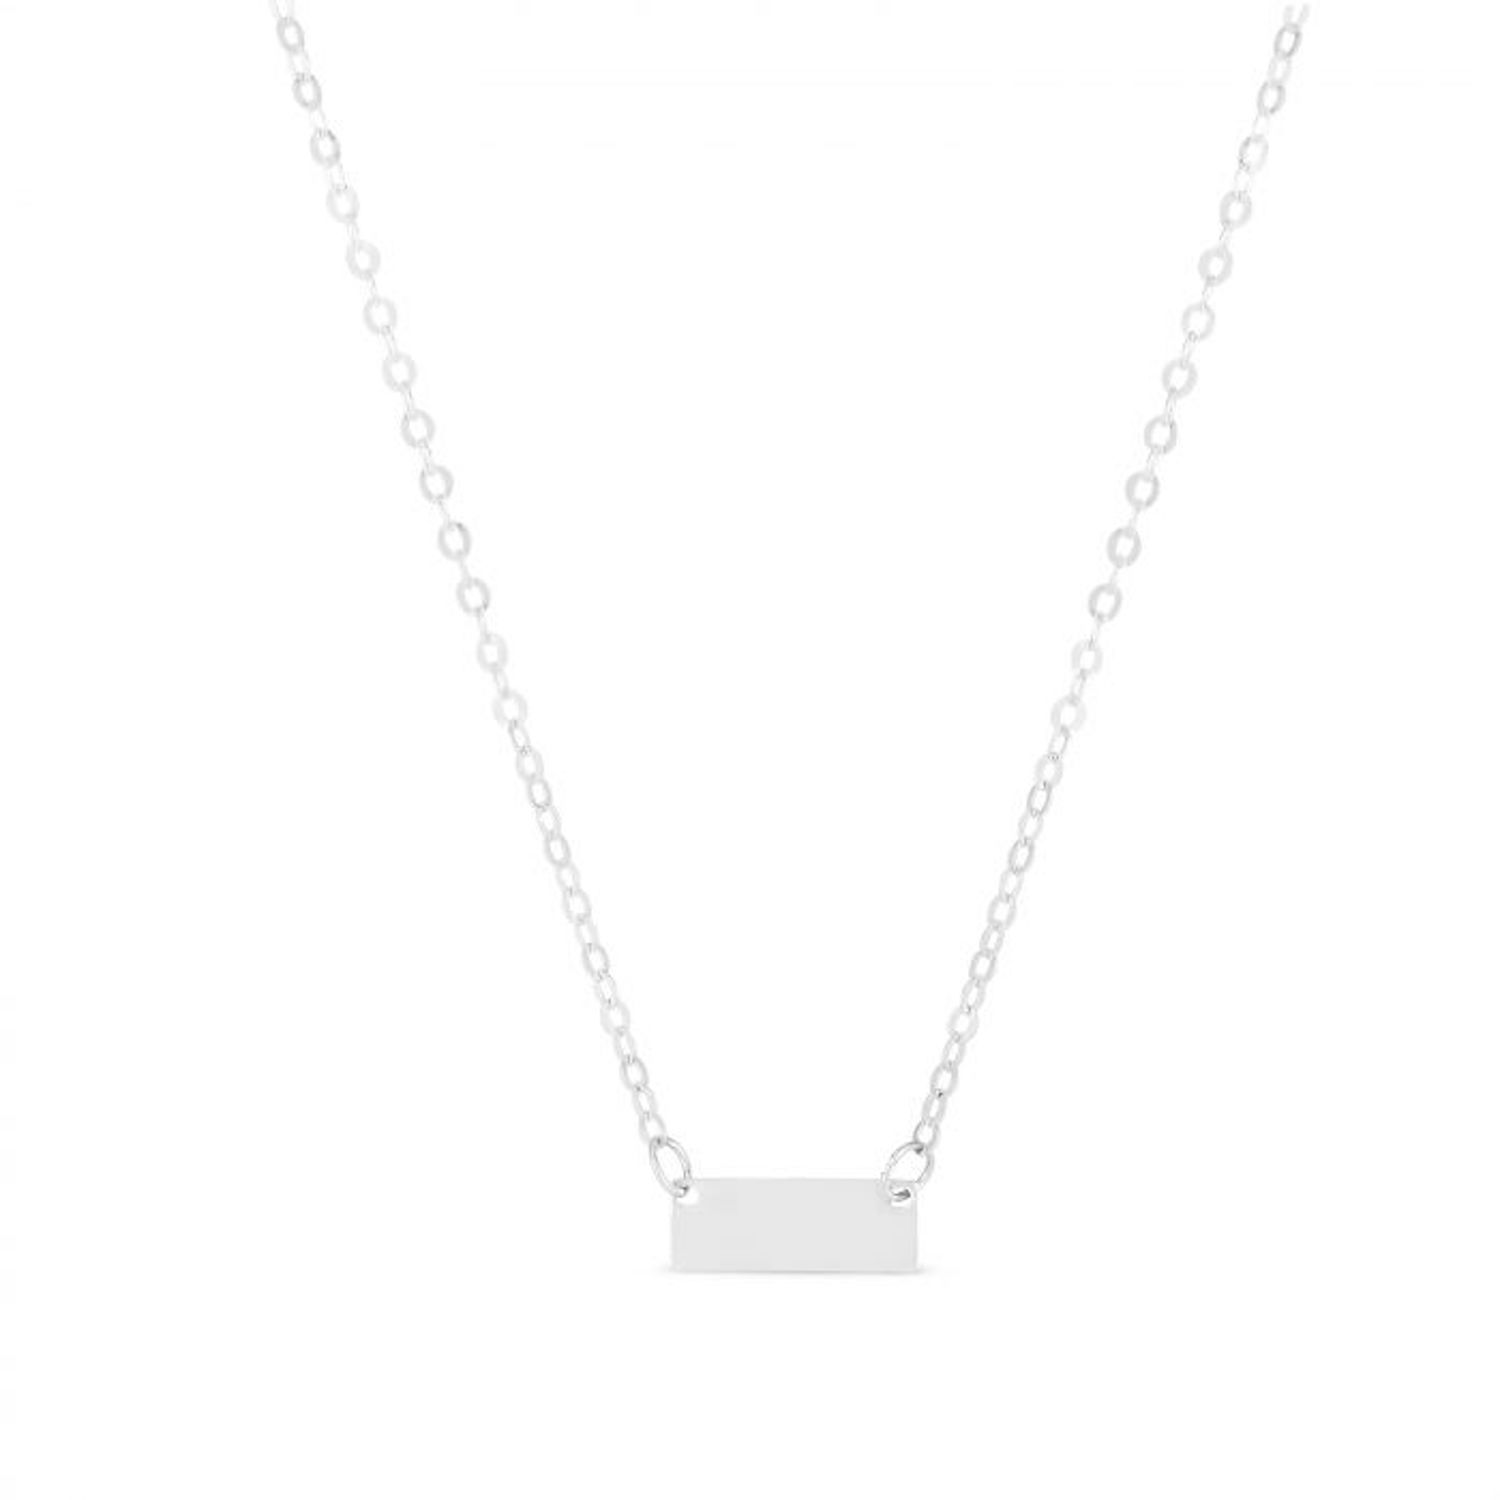 Engravable 14K Gold Yellow White Personalized Bar Pendant Necklace 16"-18" Adjus - White Gold